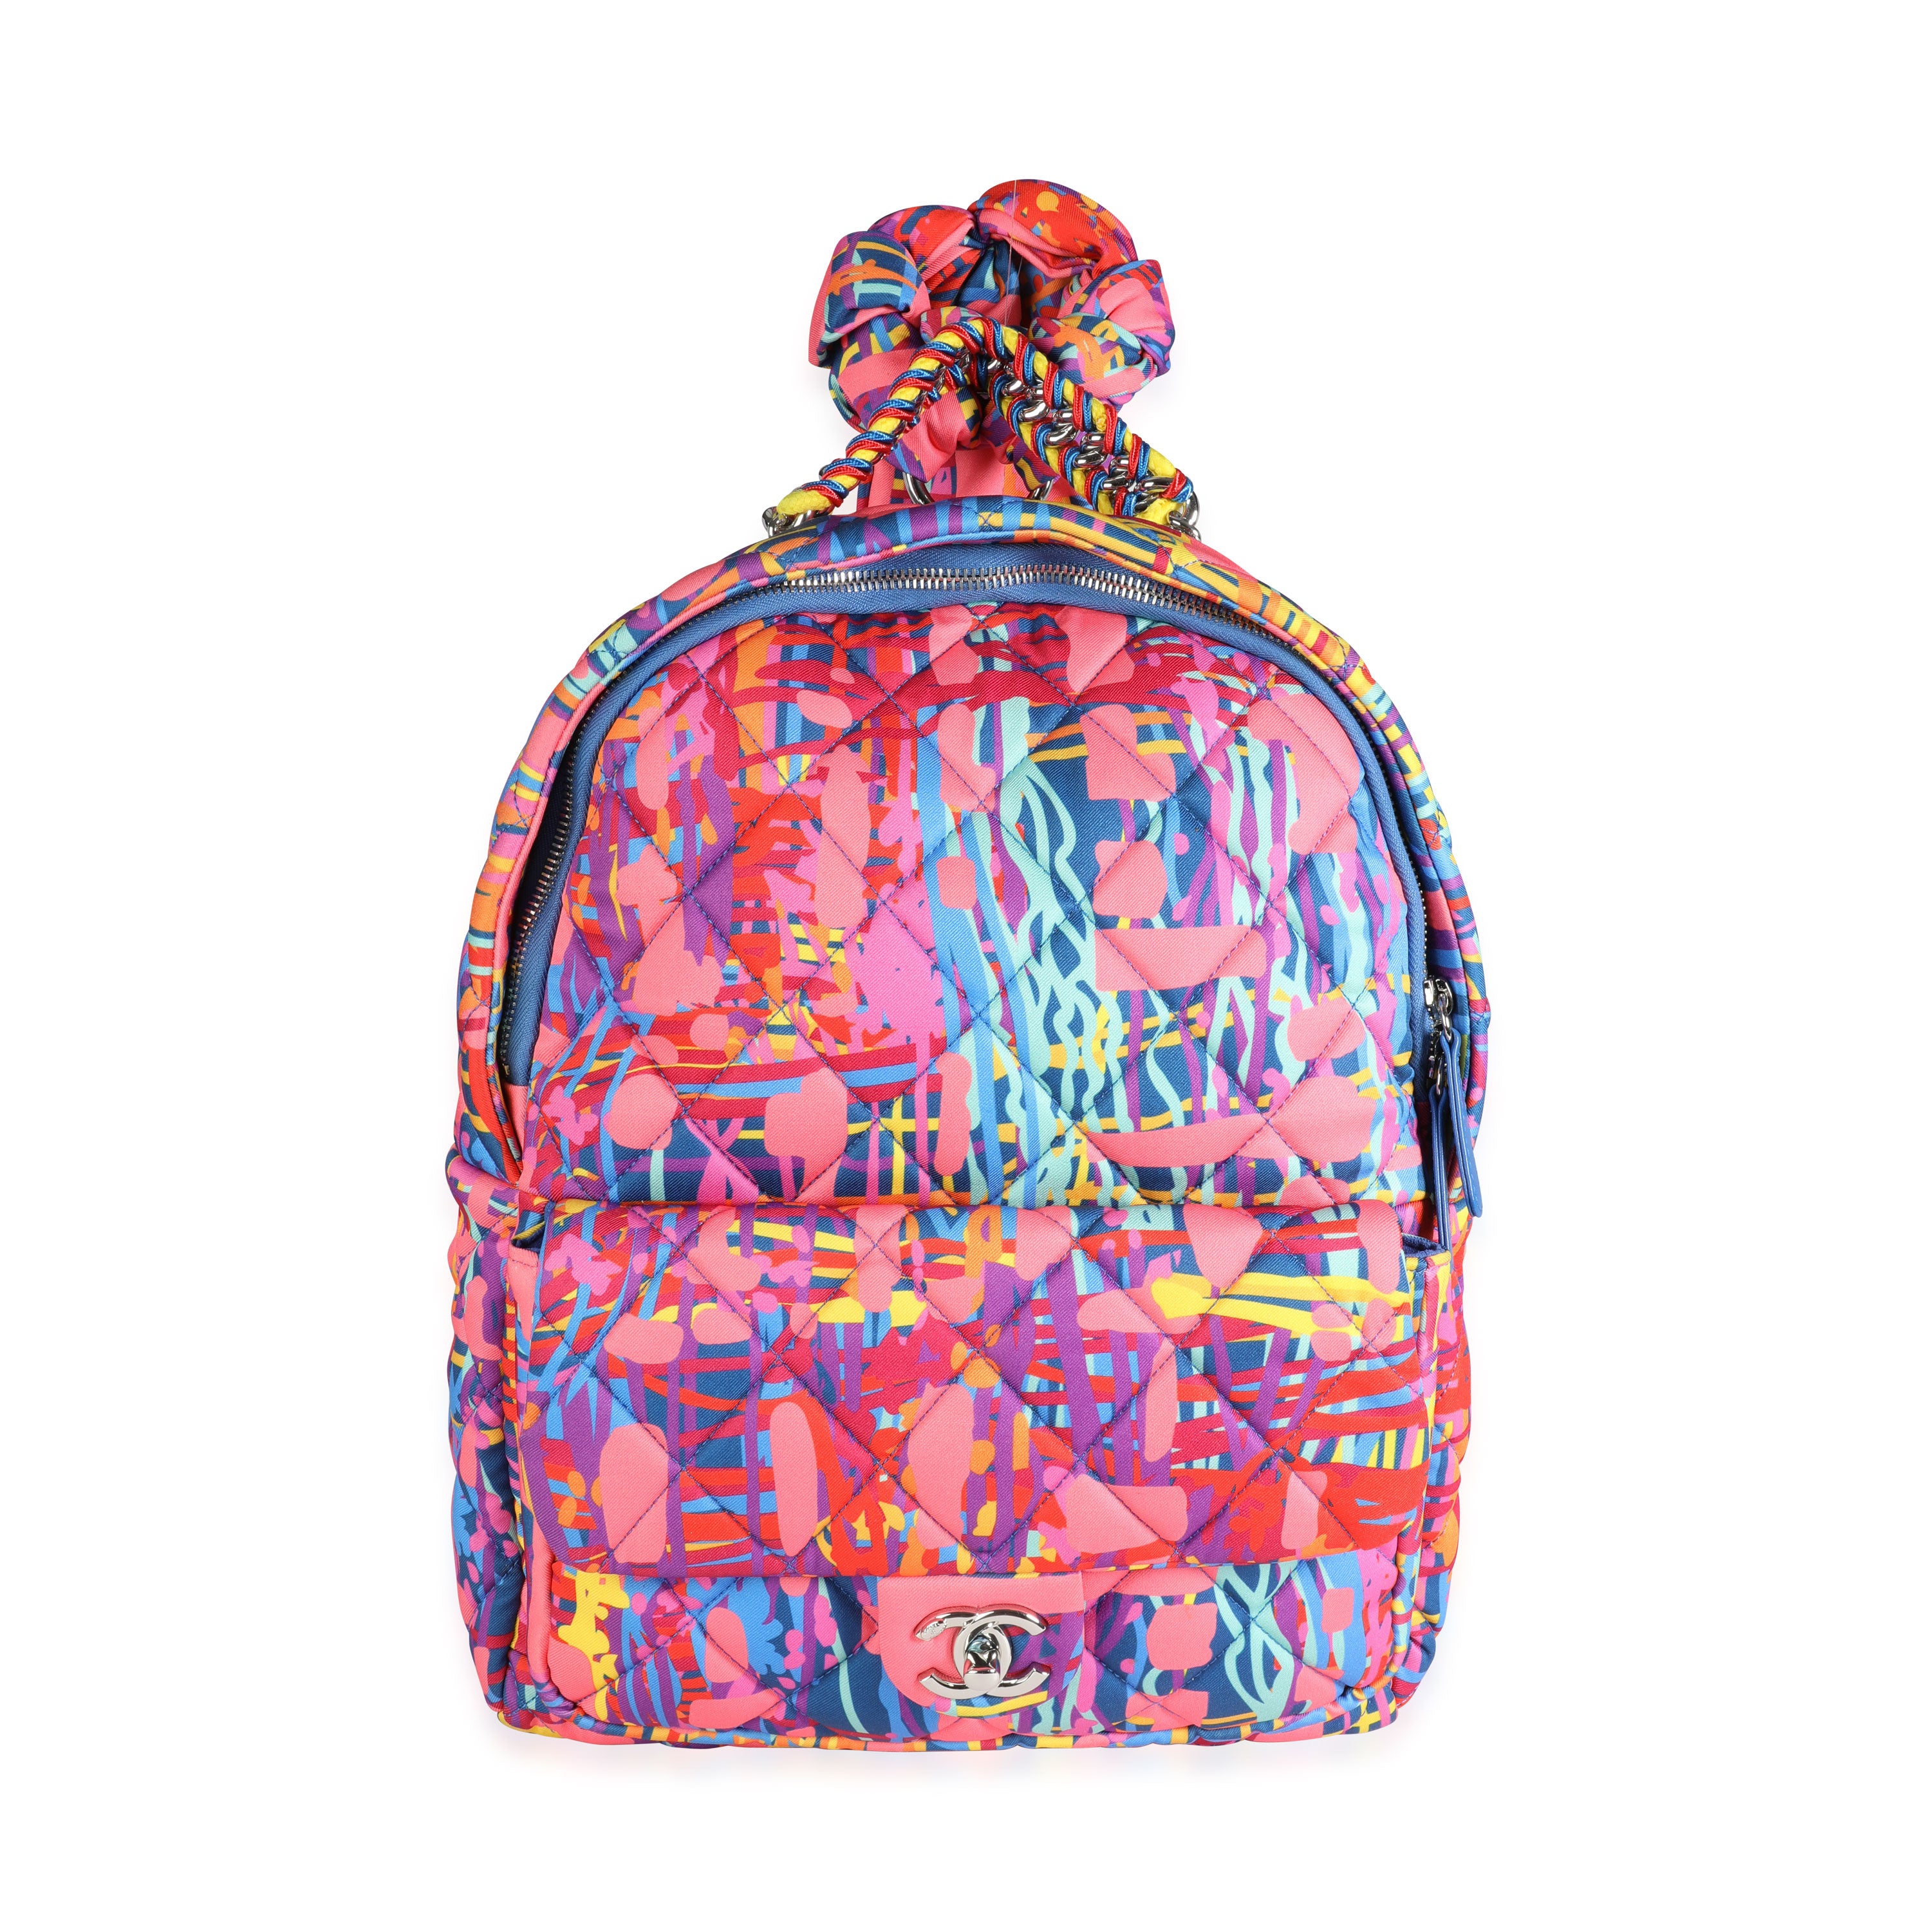 Chanel Pink & Multicolor Foulard Printed Fabric Backpack